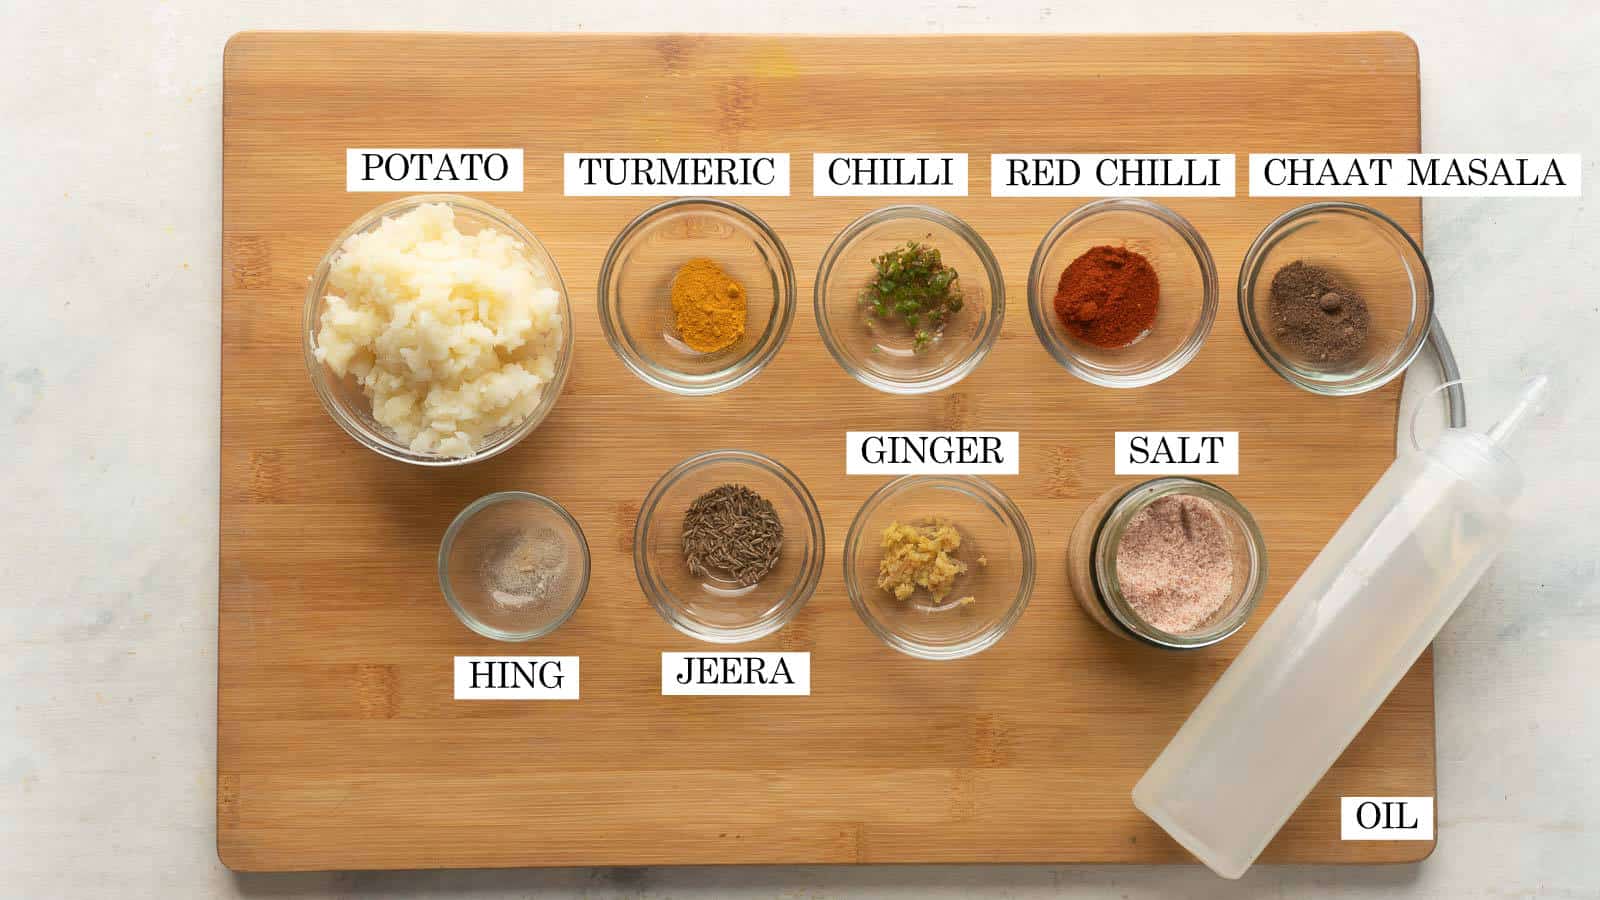 Picture of all the ingredients required for potato filling/aloo masala